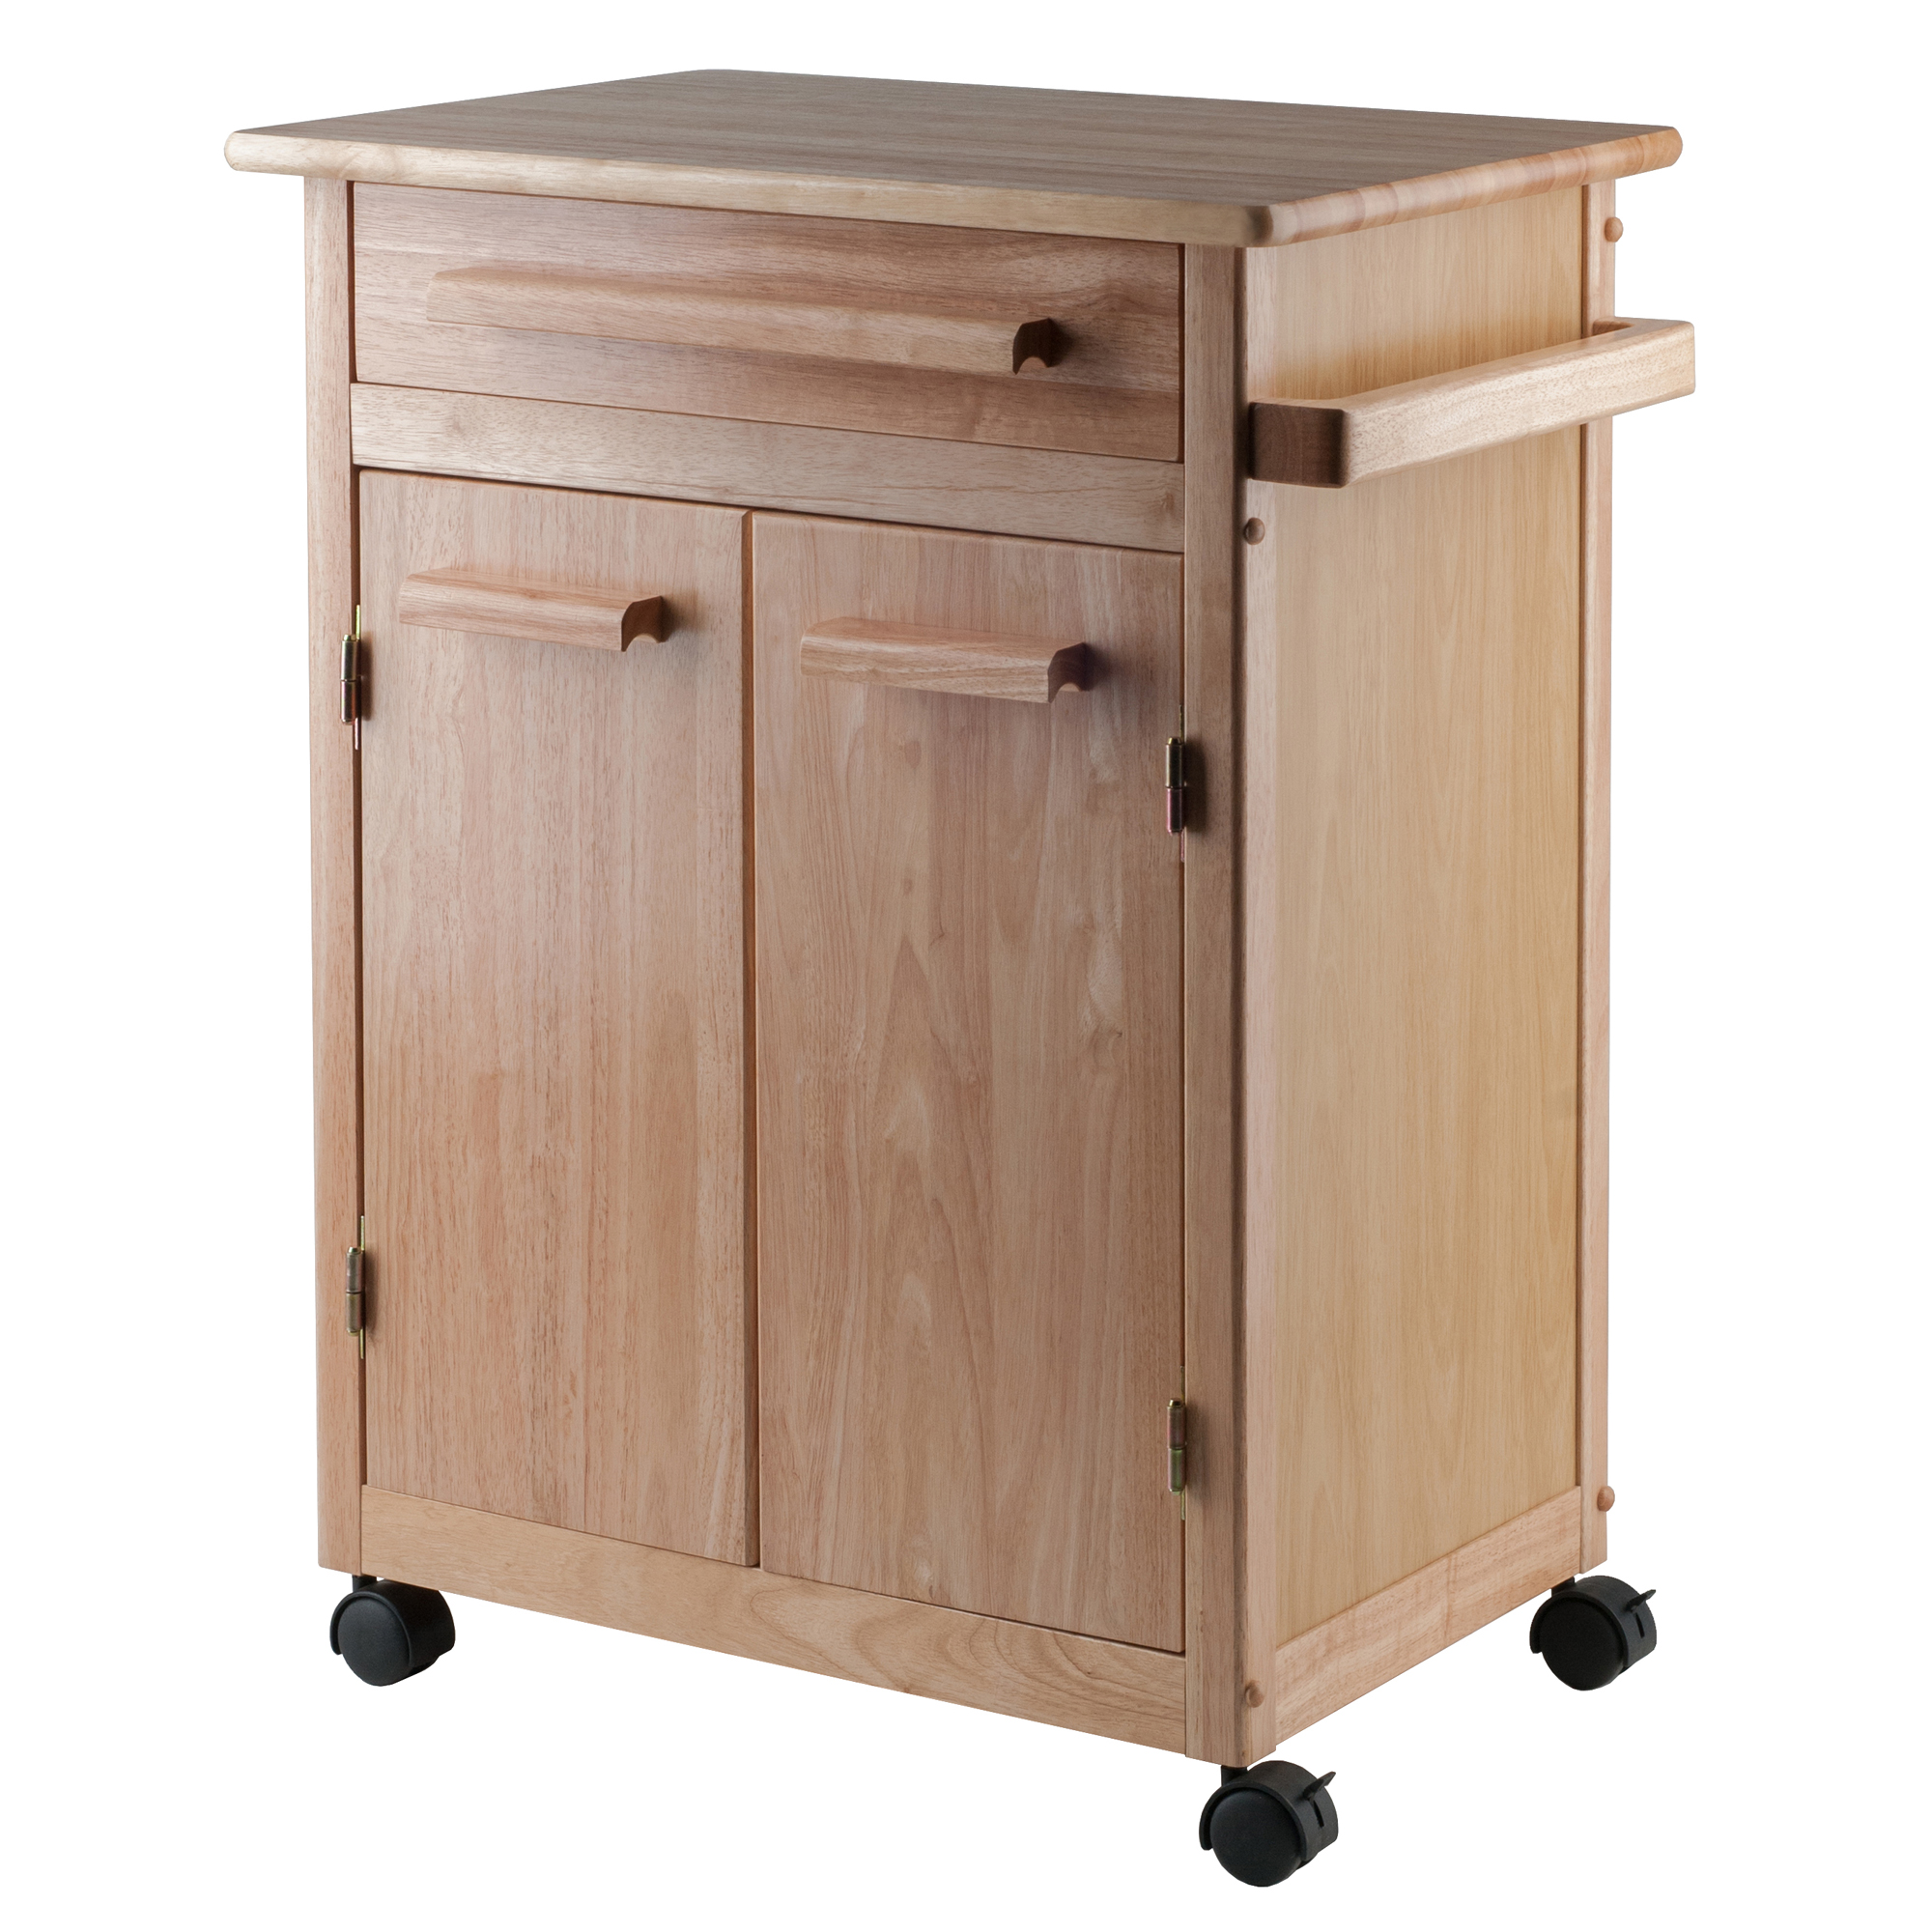 Winsome Wood Hackett Kitchen Utility Cart, Natural Finish - image 1 of 11